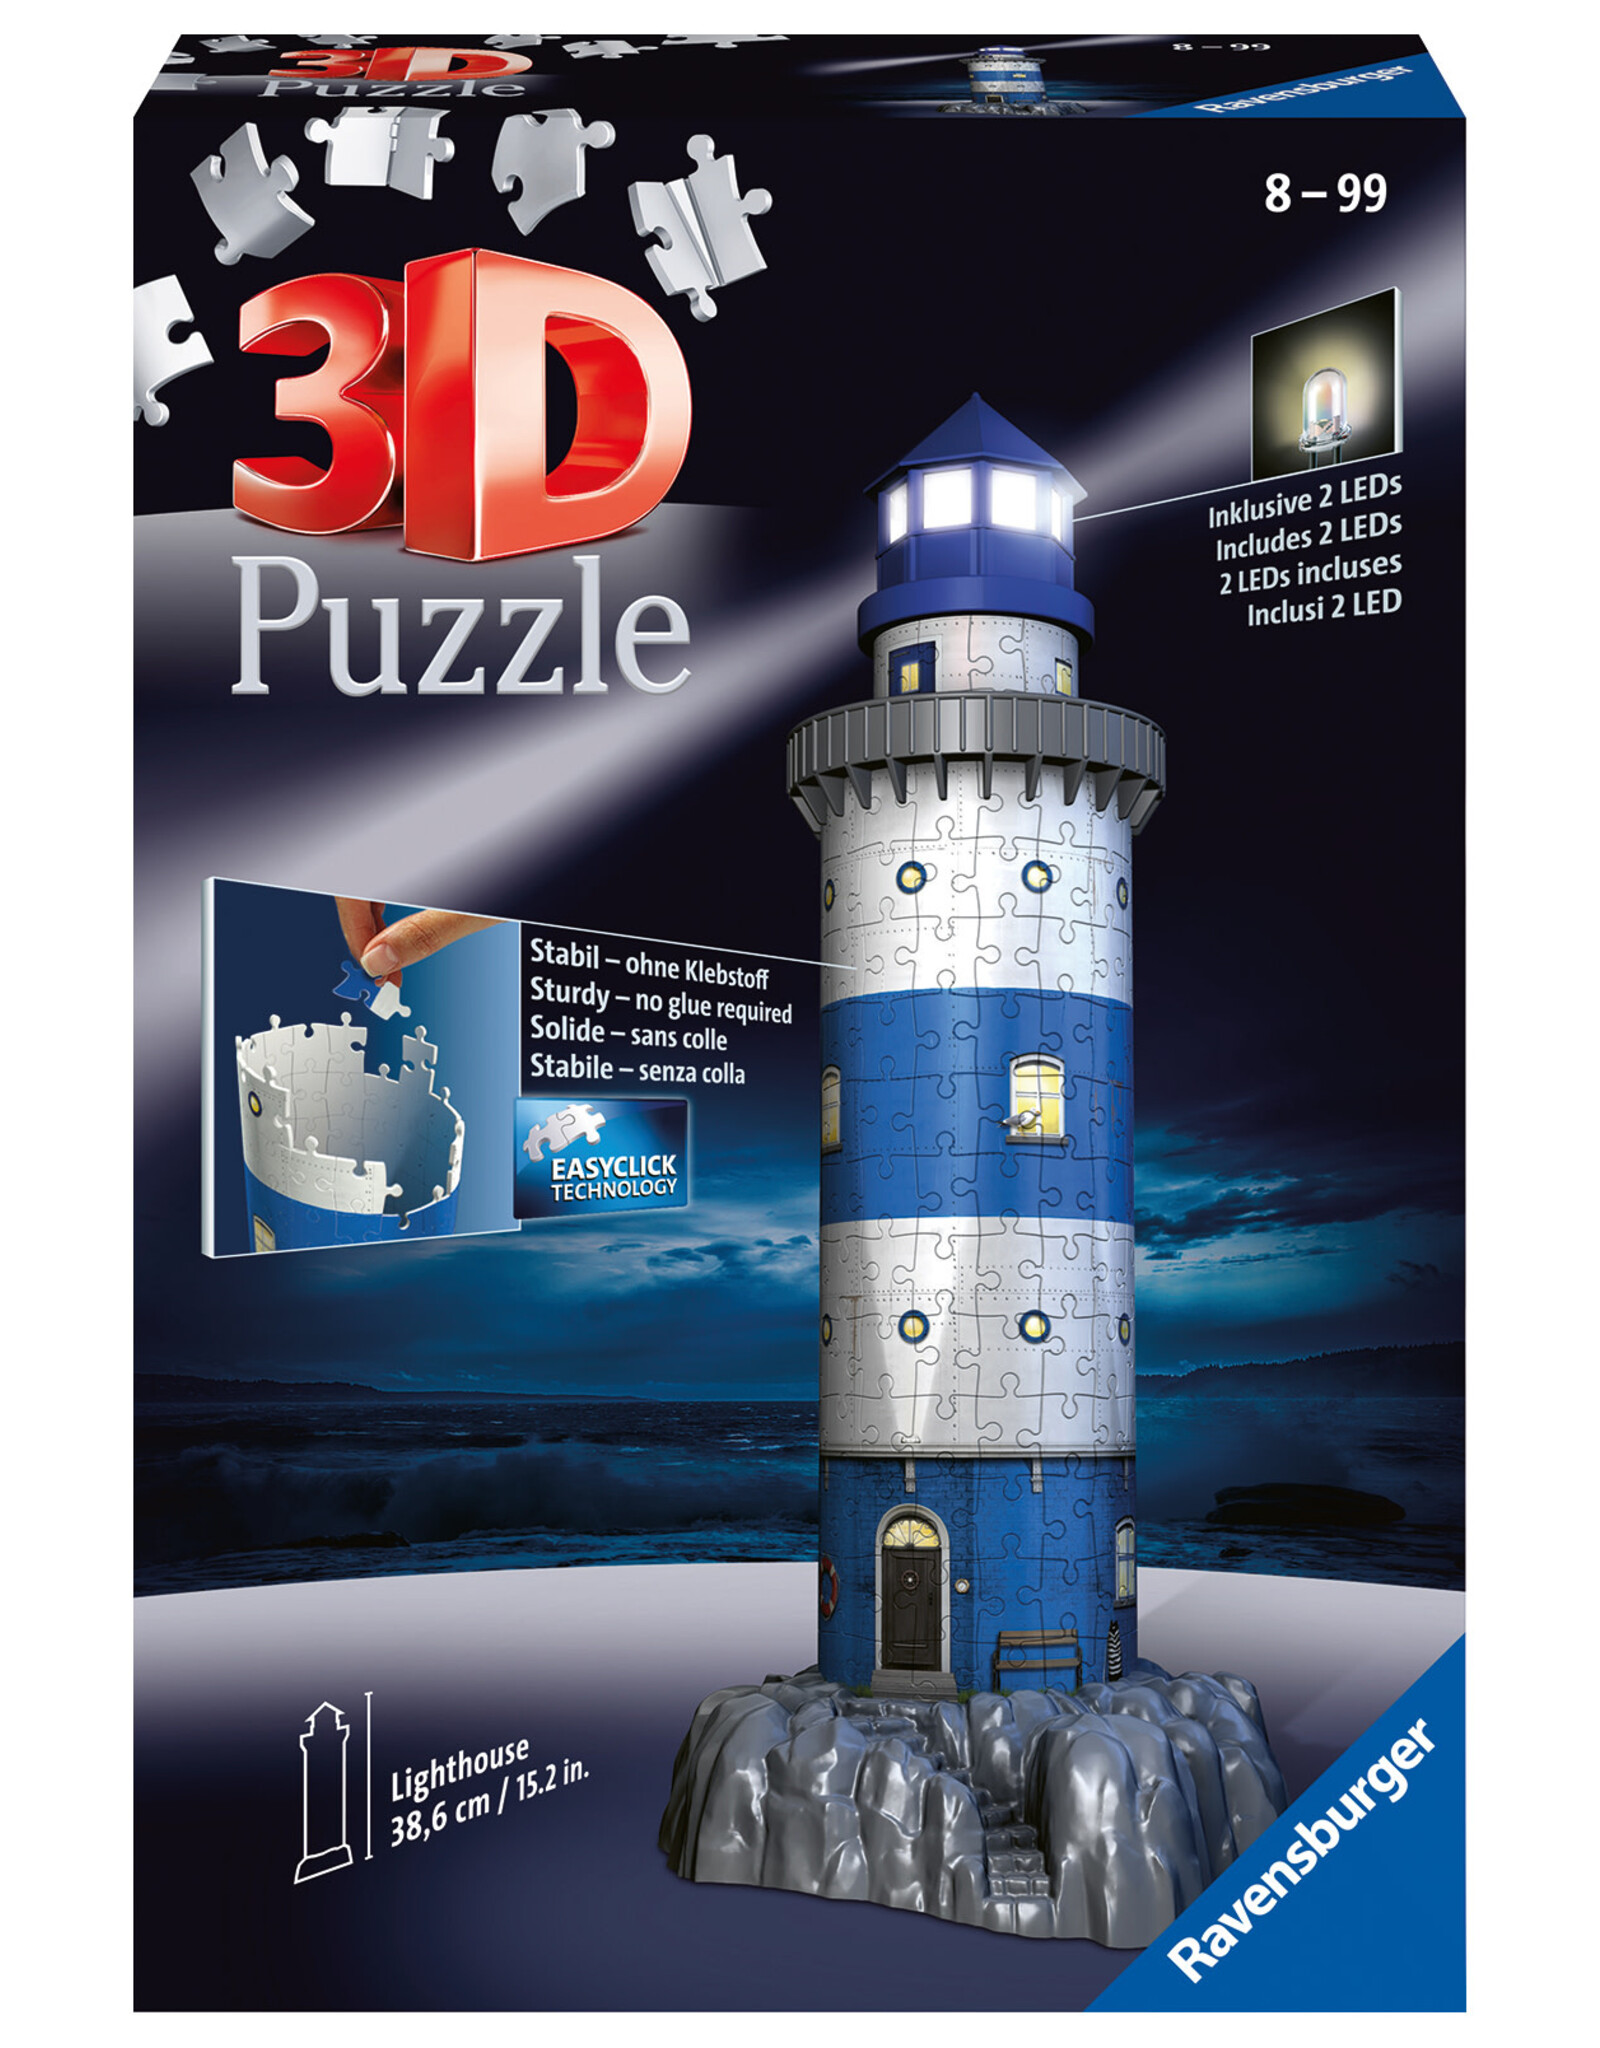 Lighthouse - Night Edition 3D 216 pc 3D Puzzle